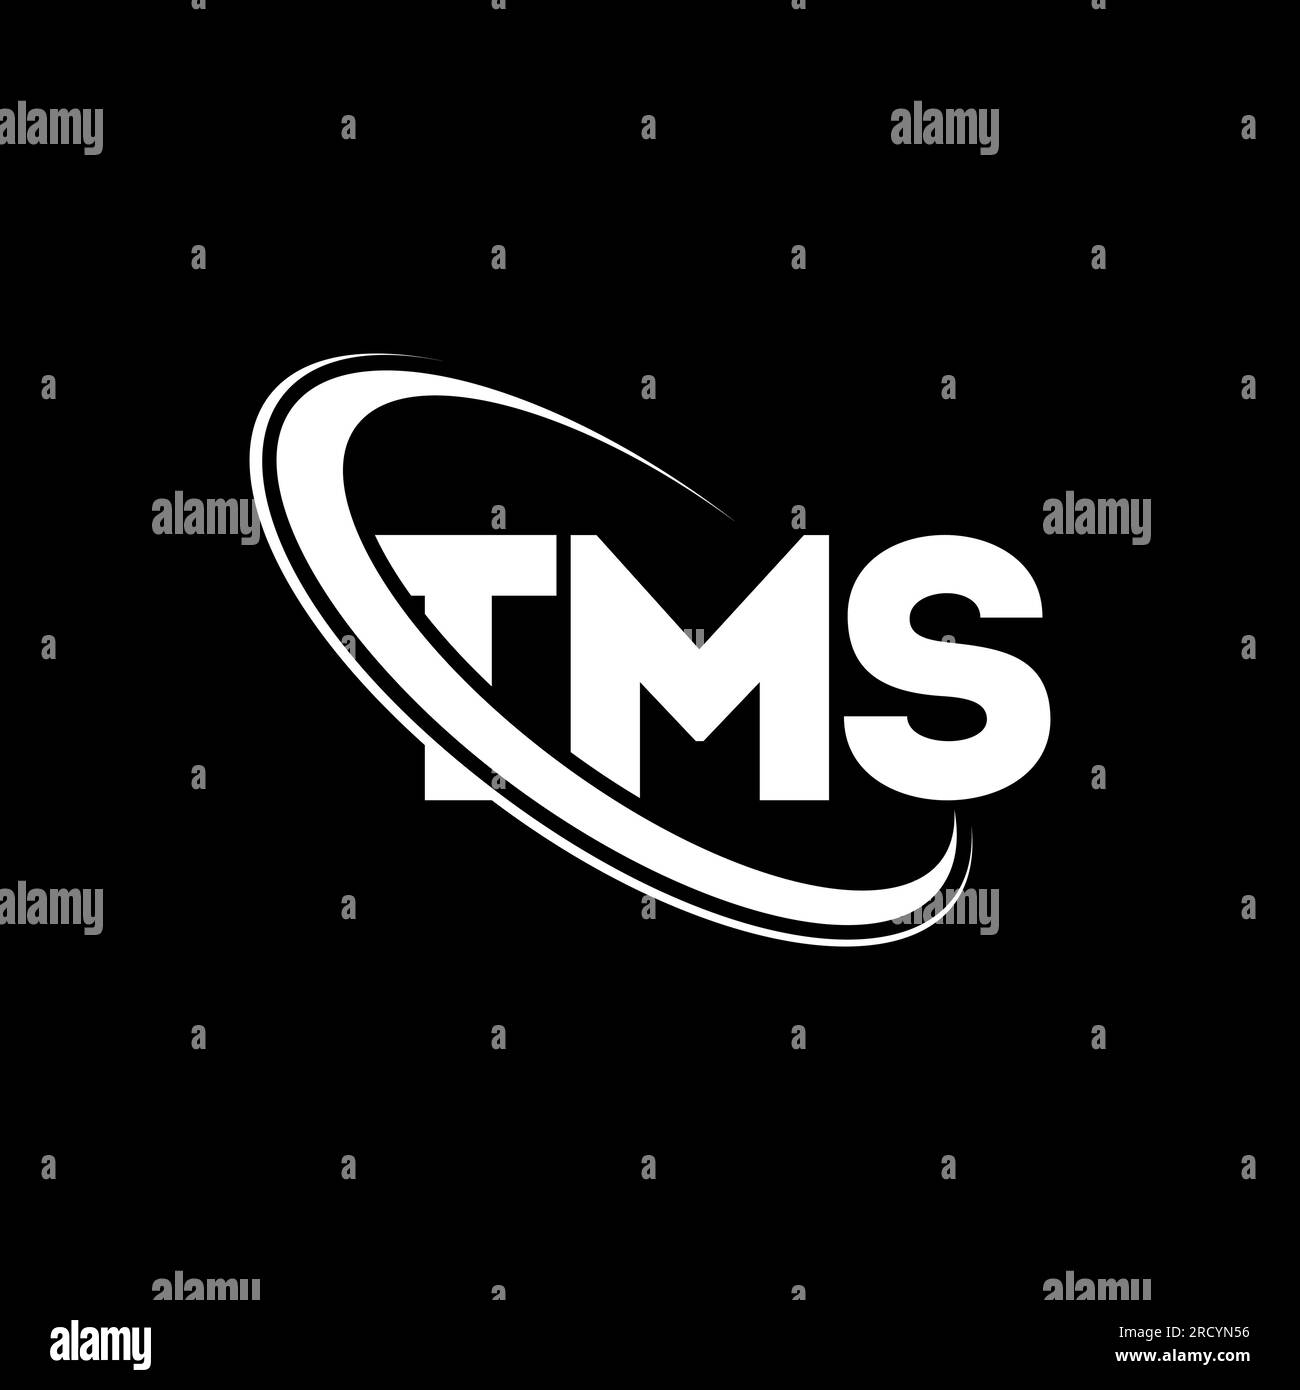 TMS logo. TMS letter. TMS letter logo design. Initials TMS logo linked with circle and uppercase monogram logo. TMS typography for technology, busines Stock Vector